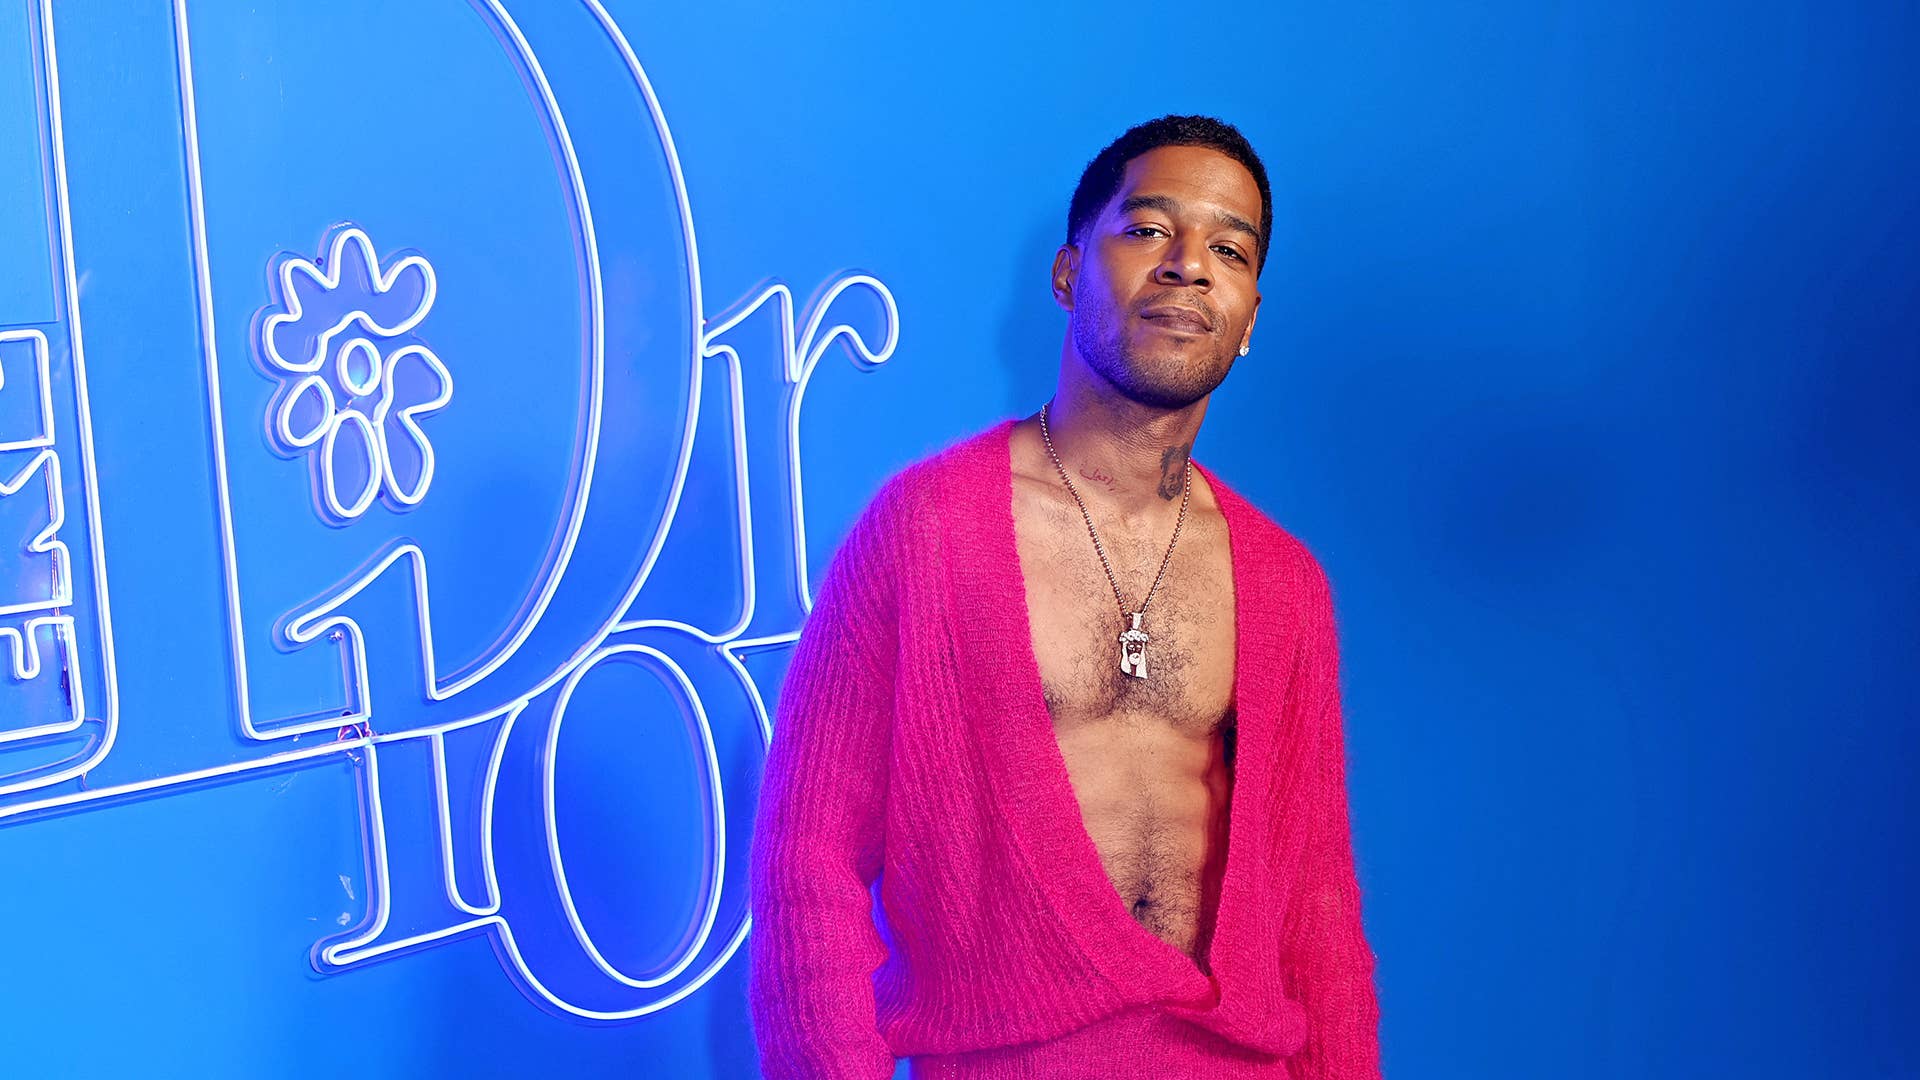 Kid Cudi attends the Dior Men's Spring/Summer 2023 Collection on May 19, 2022 in Los Angeles, California